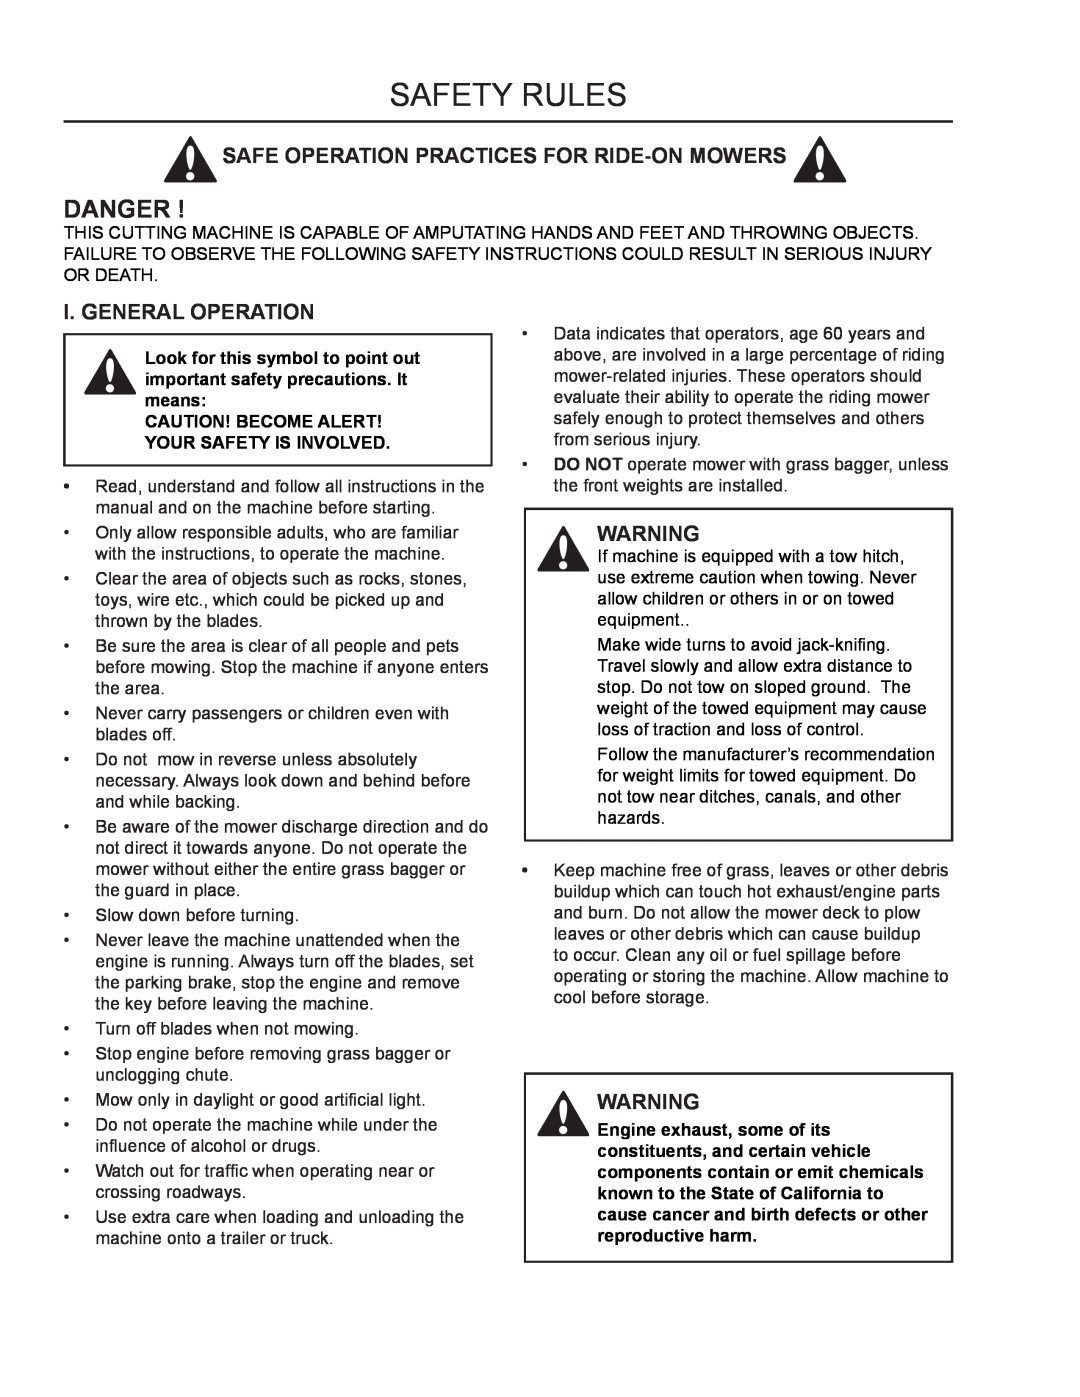 Dixon 115 150227, 966 004301 manual Safety Rules, Safe Operation Practices For Ride-On Mowers, I. General Operation, Danger 